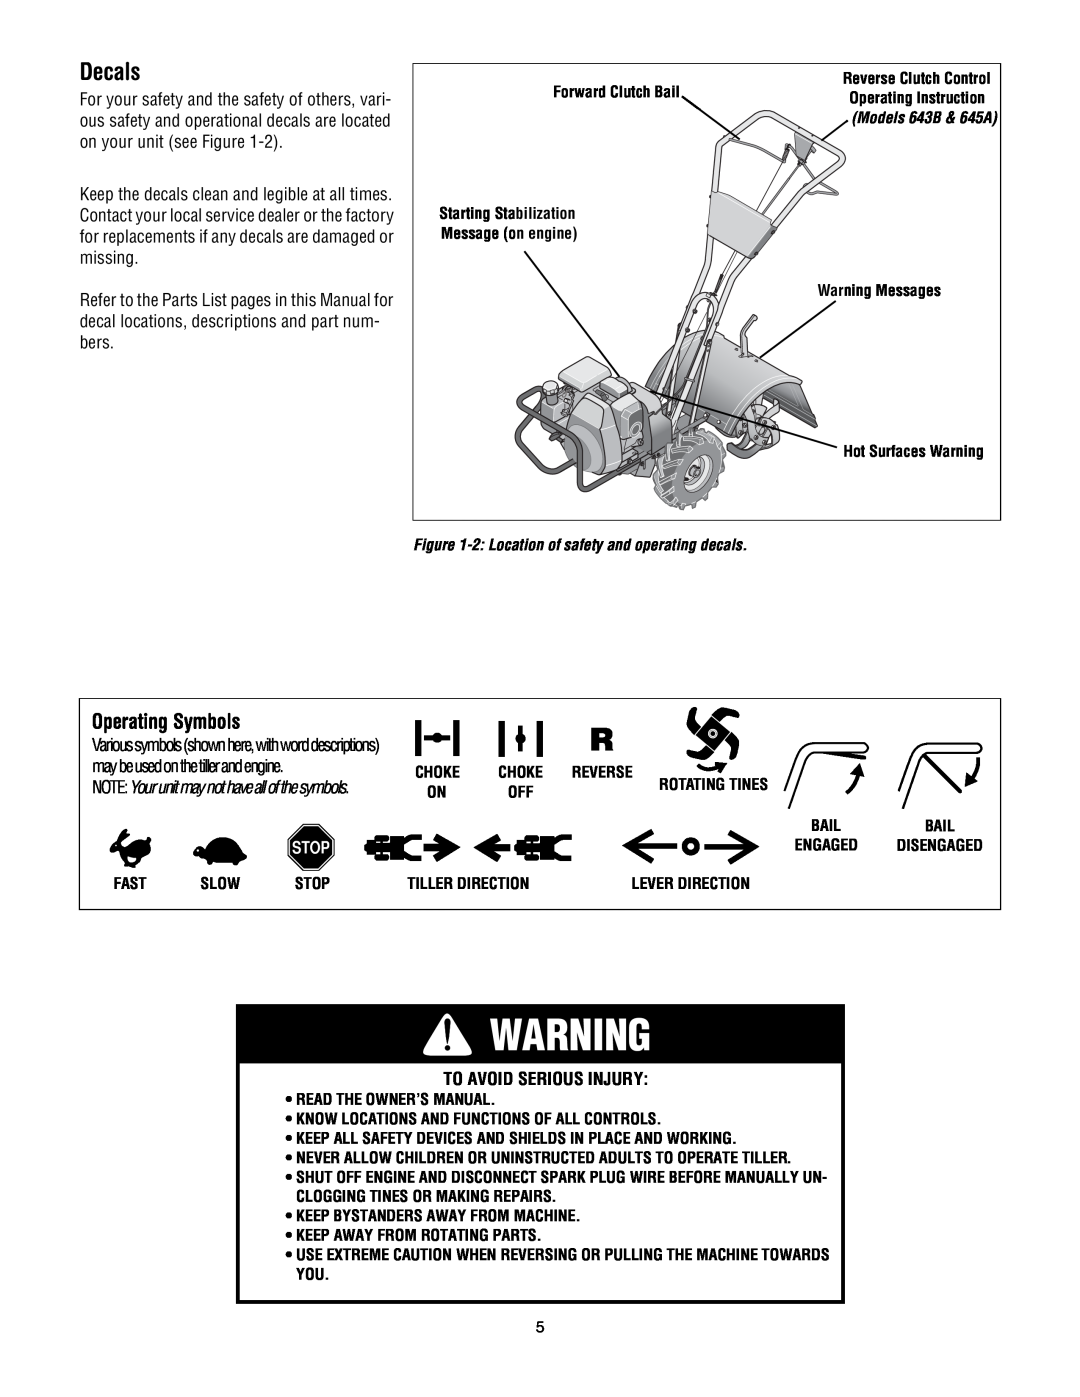 Troy-Bilt 643C Tuffy/Bronco, 645A Super Bronco manual Decals, Operating Symbols, To Avoid Serious Injury 